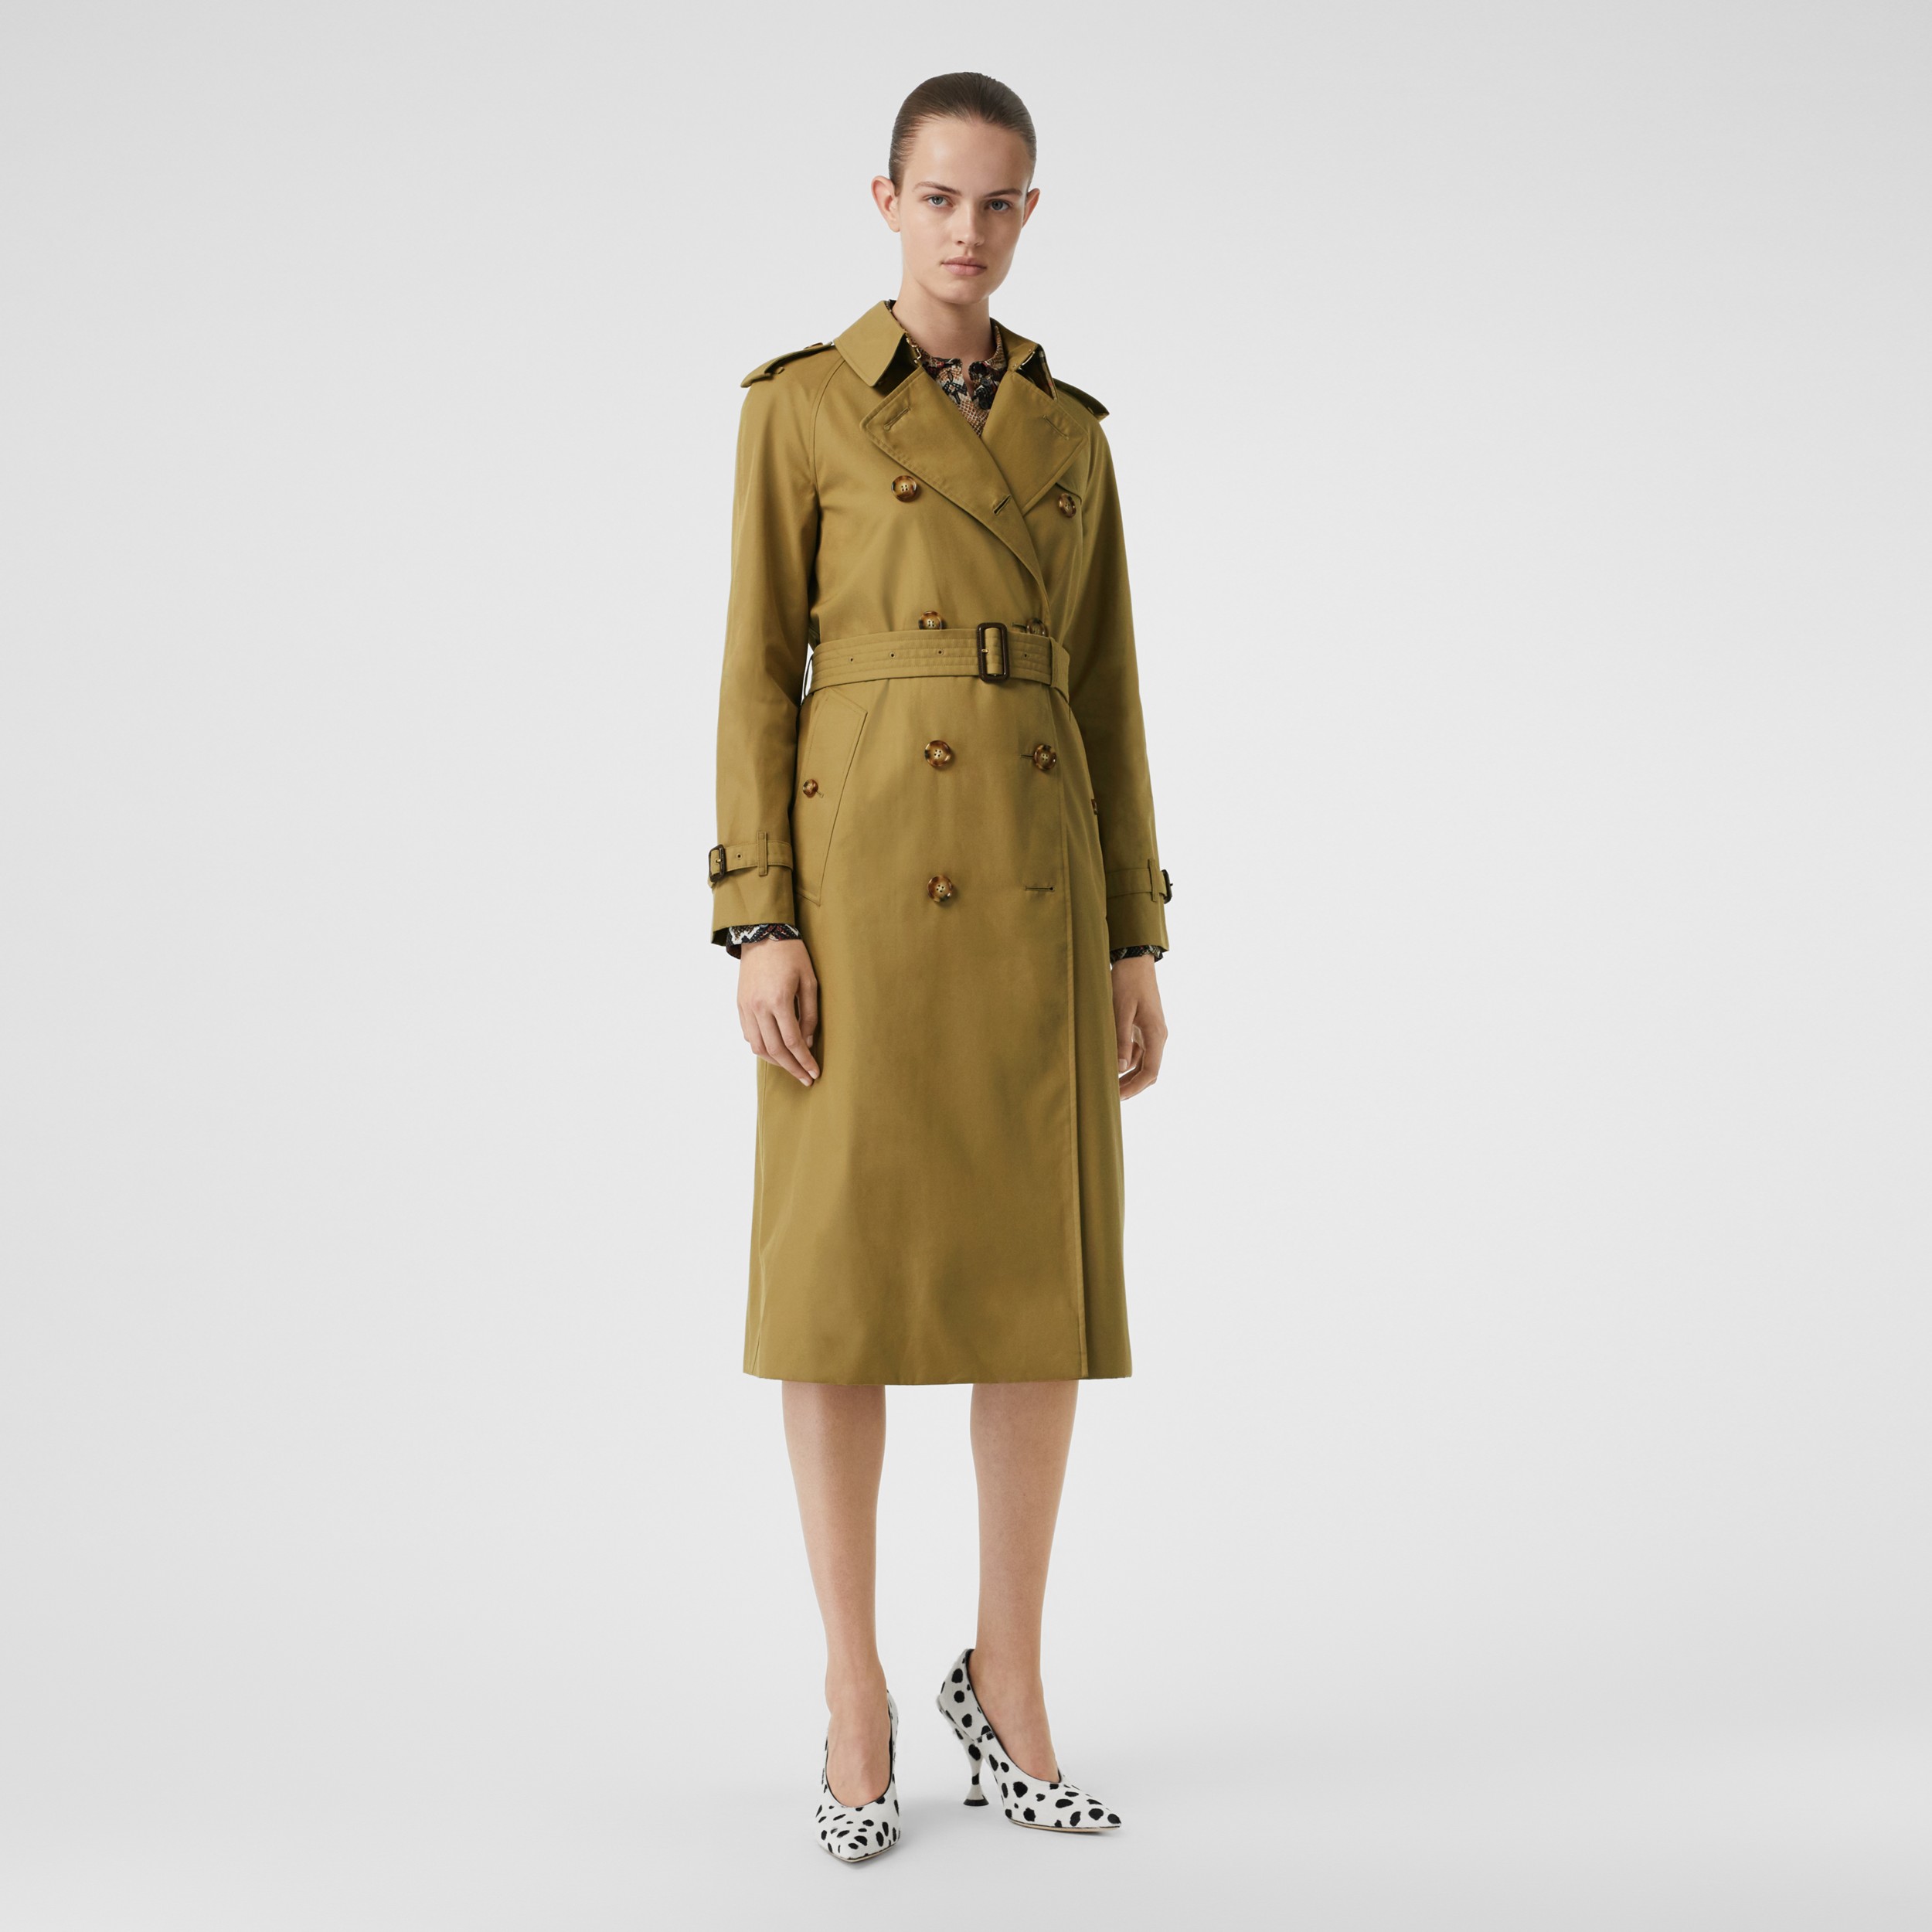 The Waterloo Trench Coat in Rich Olive - Women | Burberry United States